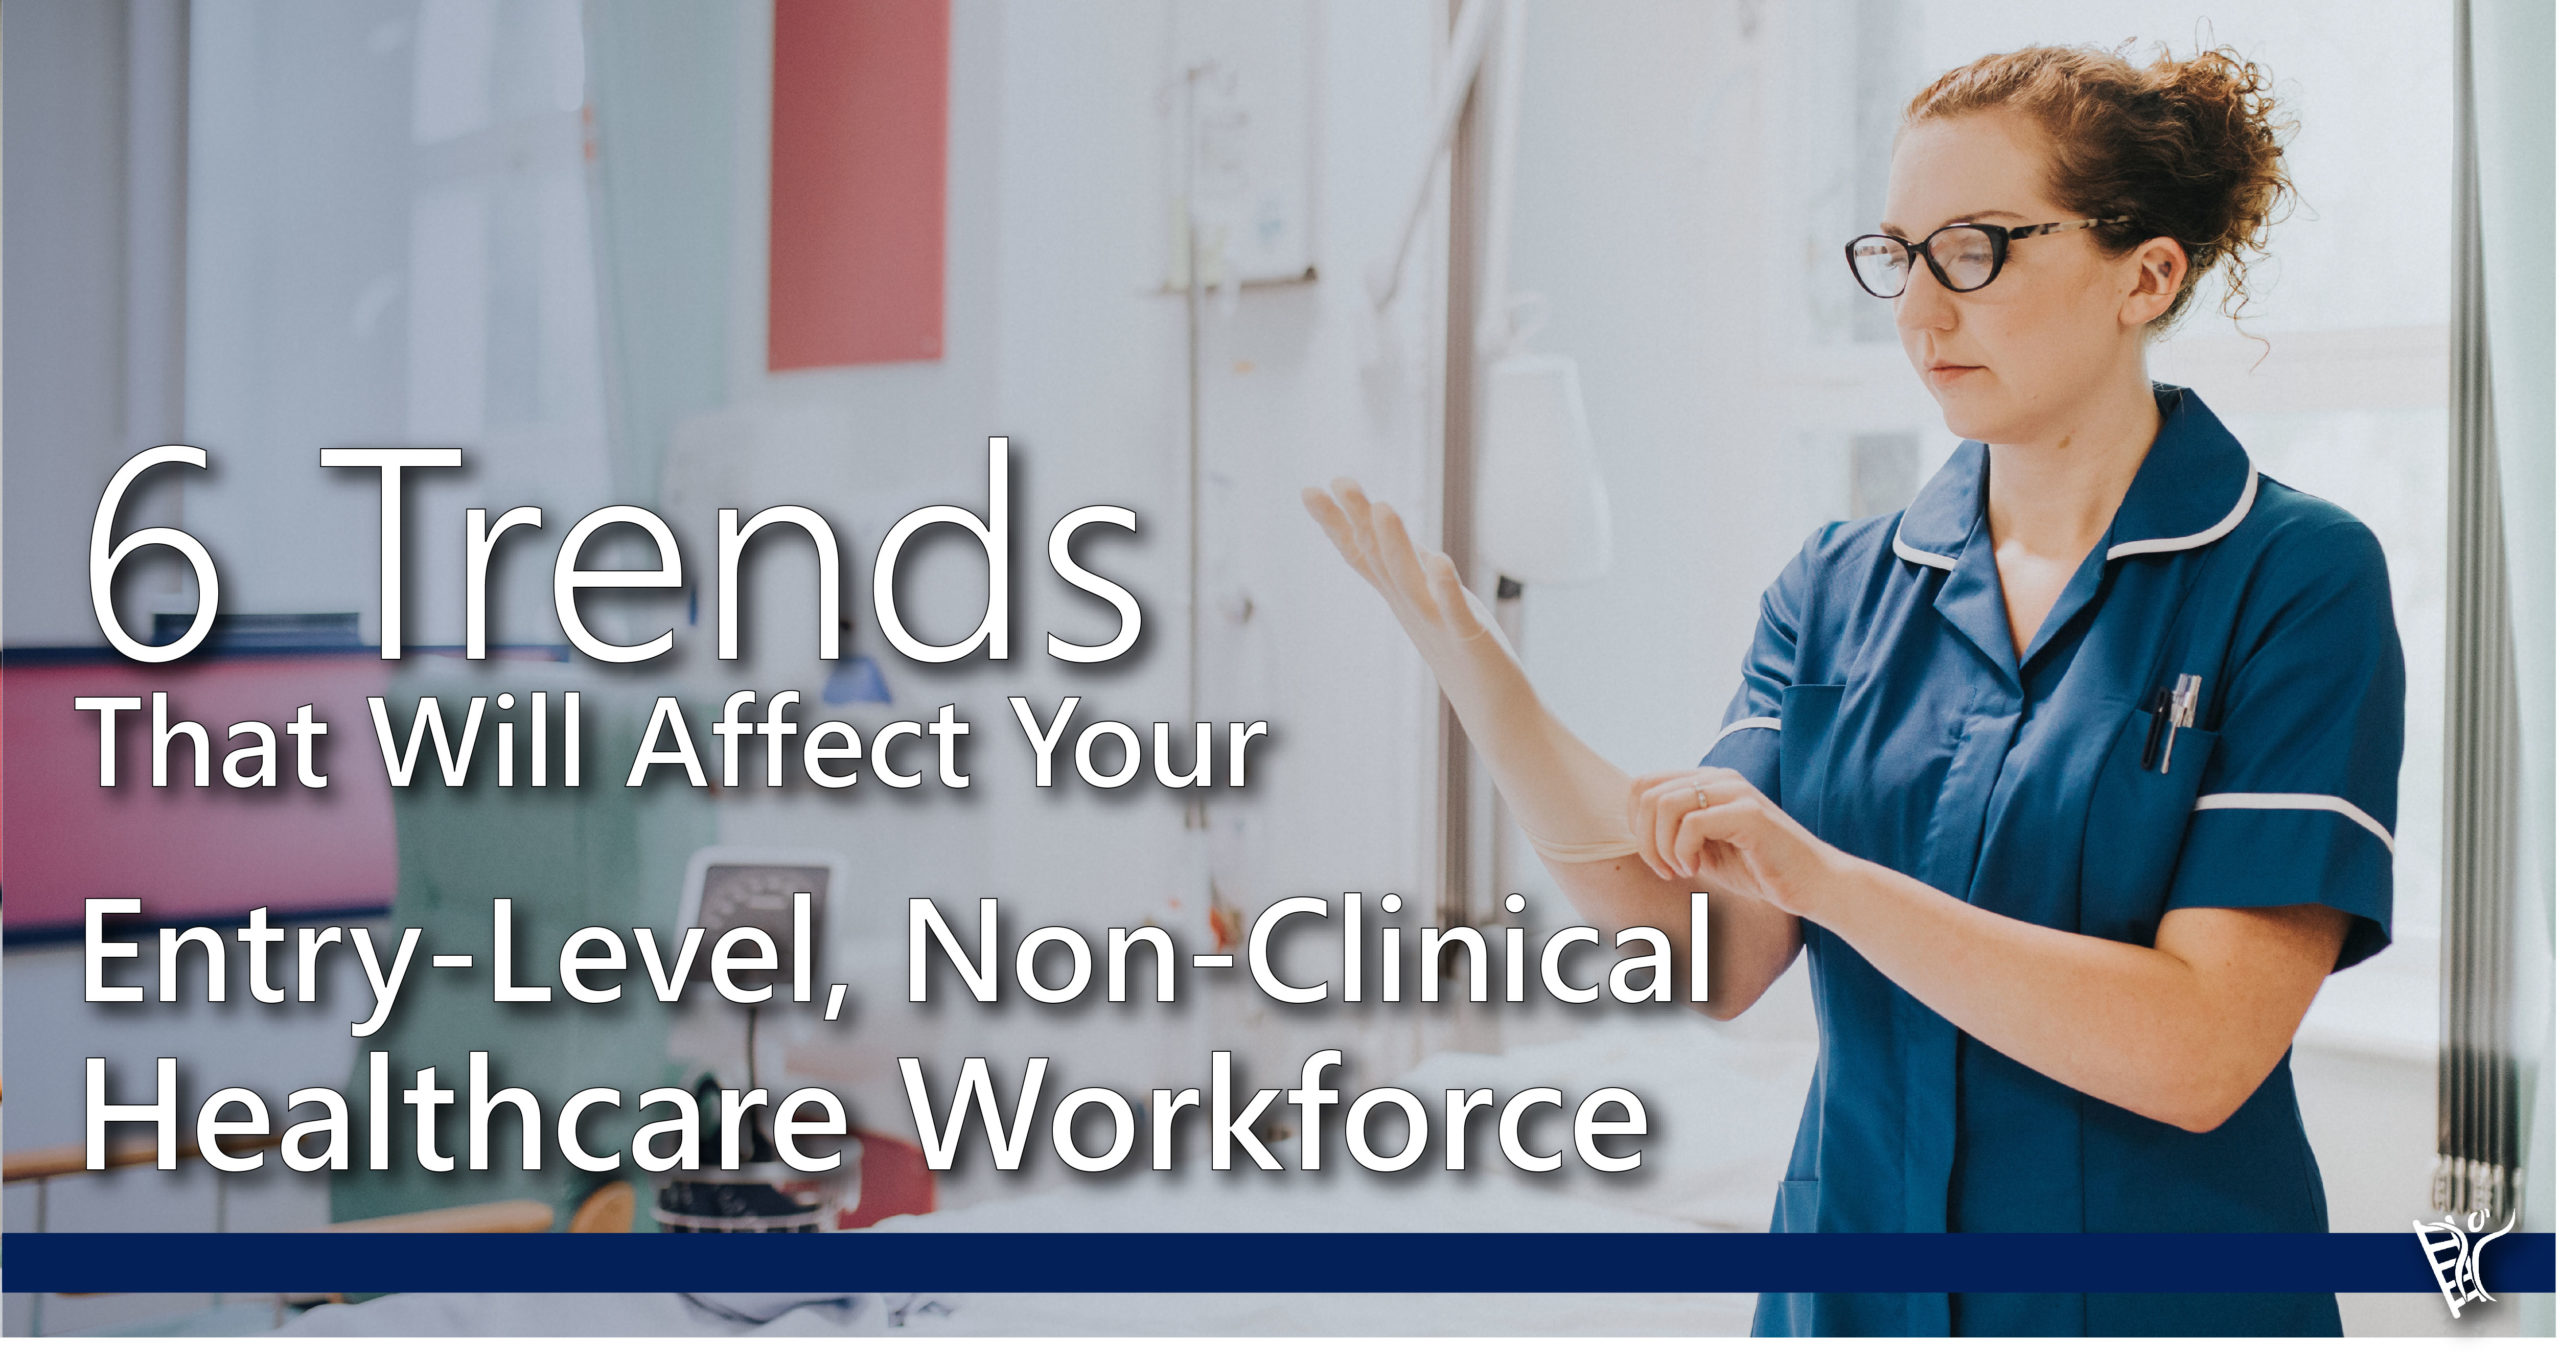 6 Trends That Will Affect Your Entry-Level, Non-Clinical Healthcare Workforce